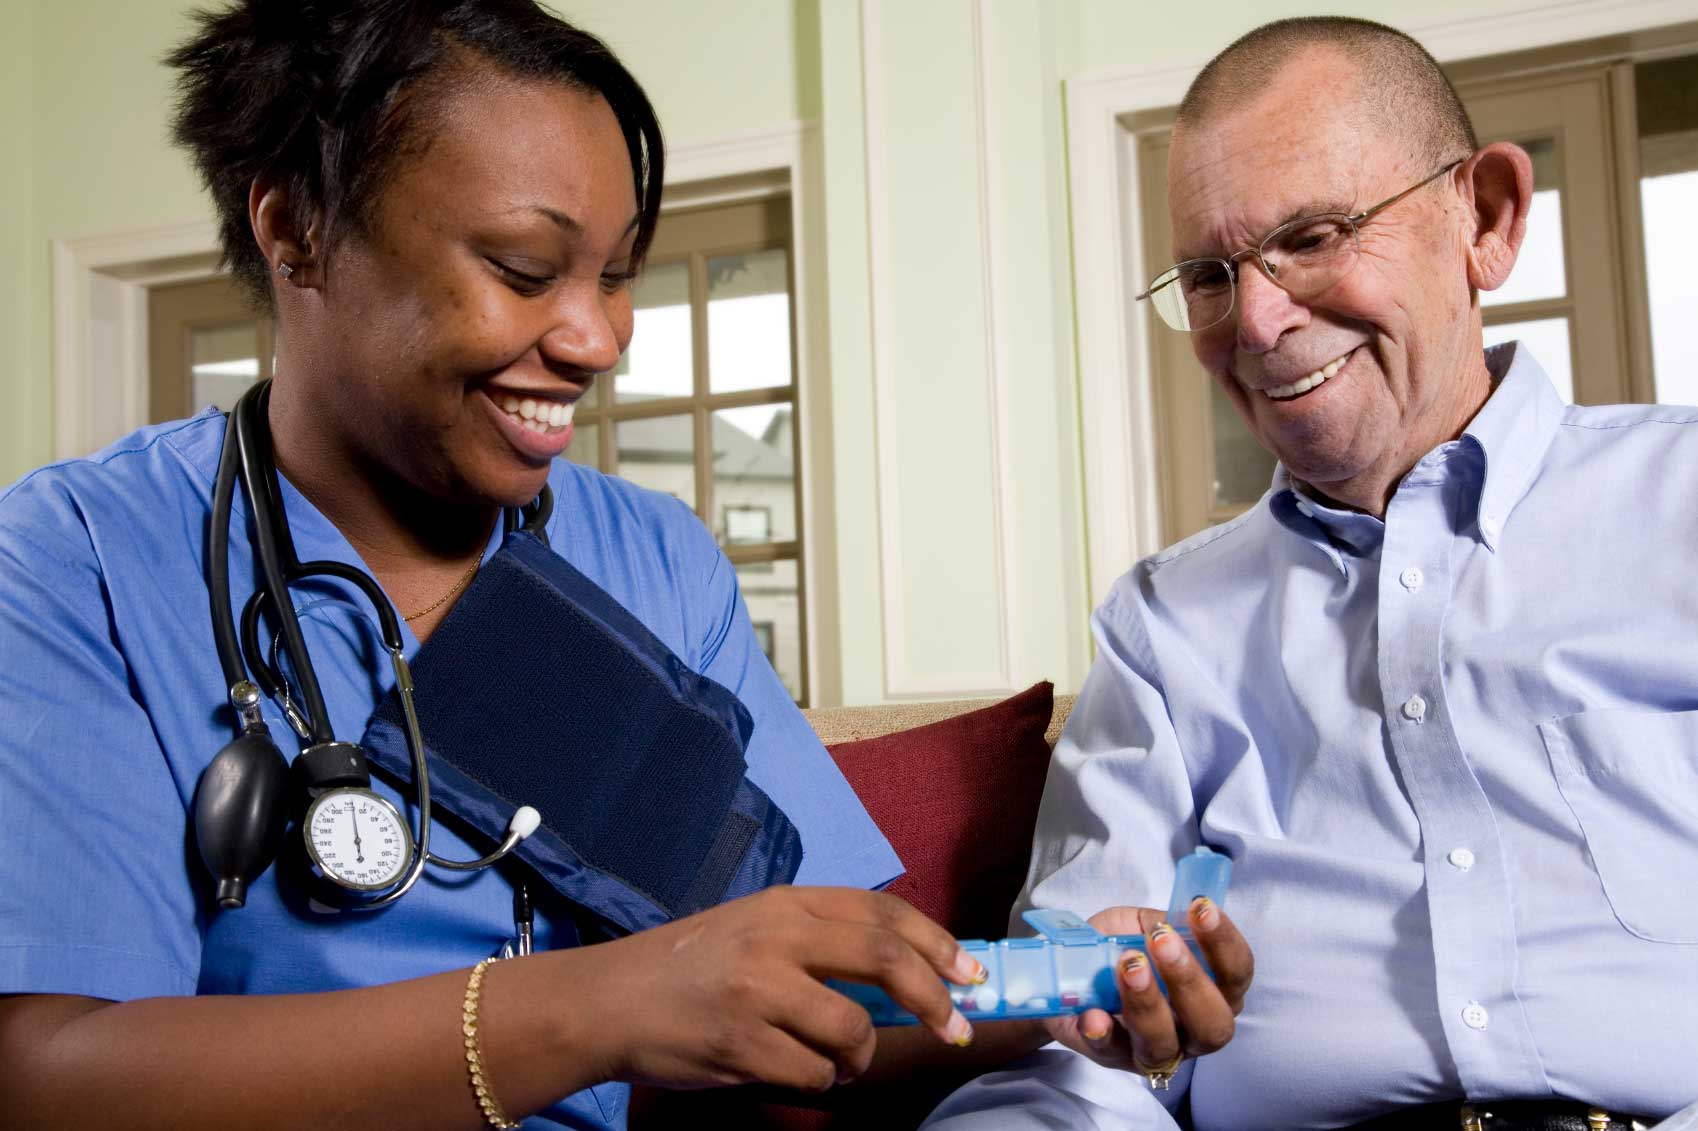 female caregiver administrating medication to senior male patient